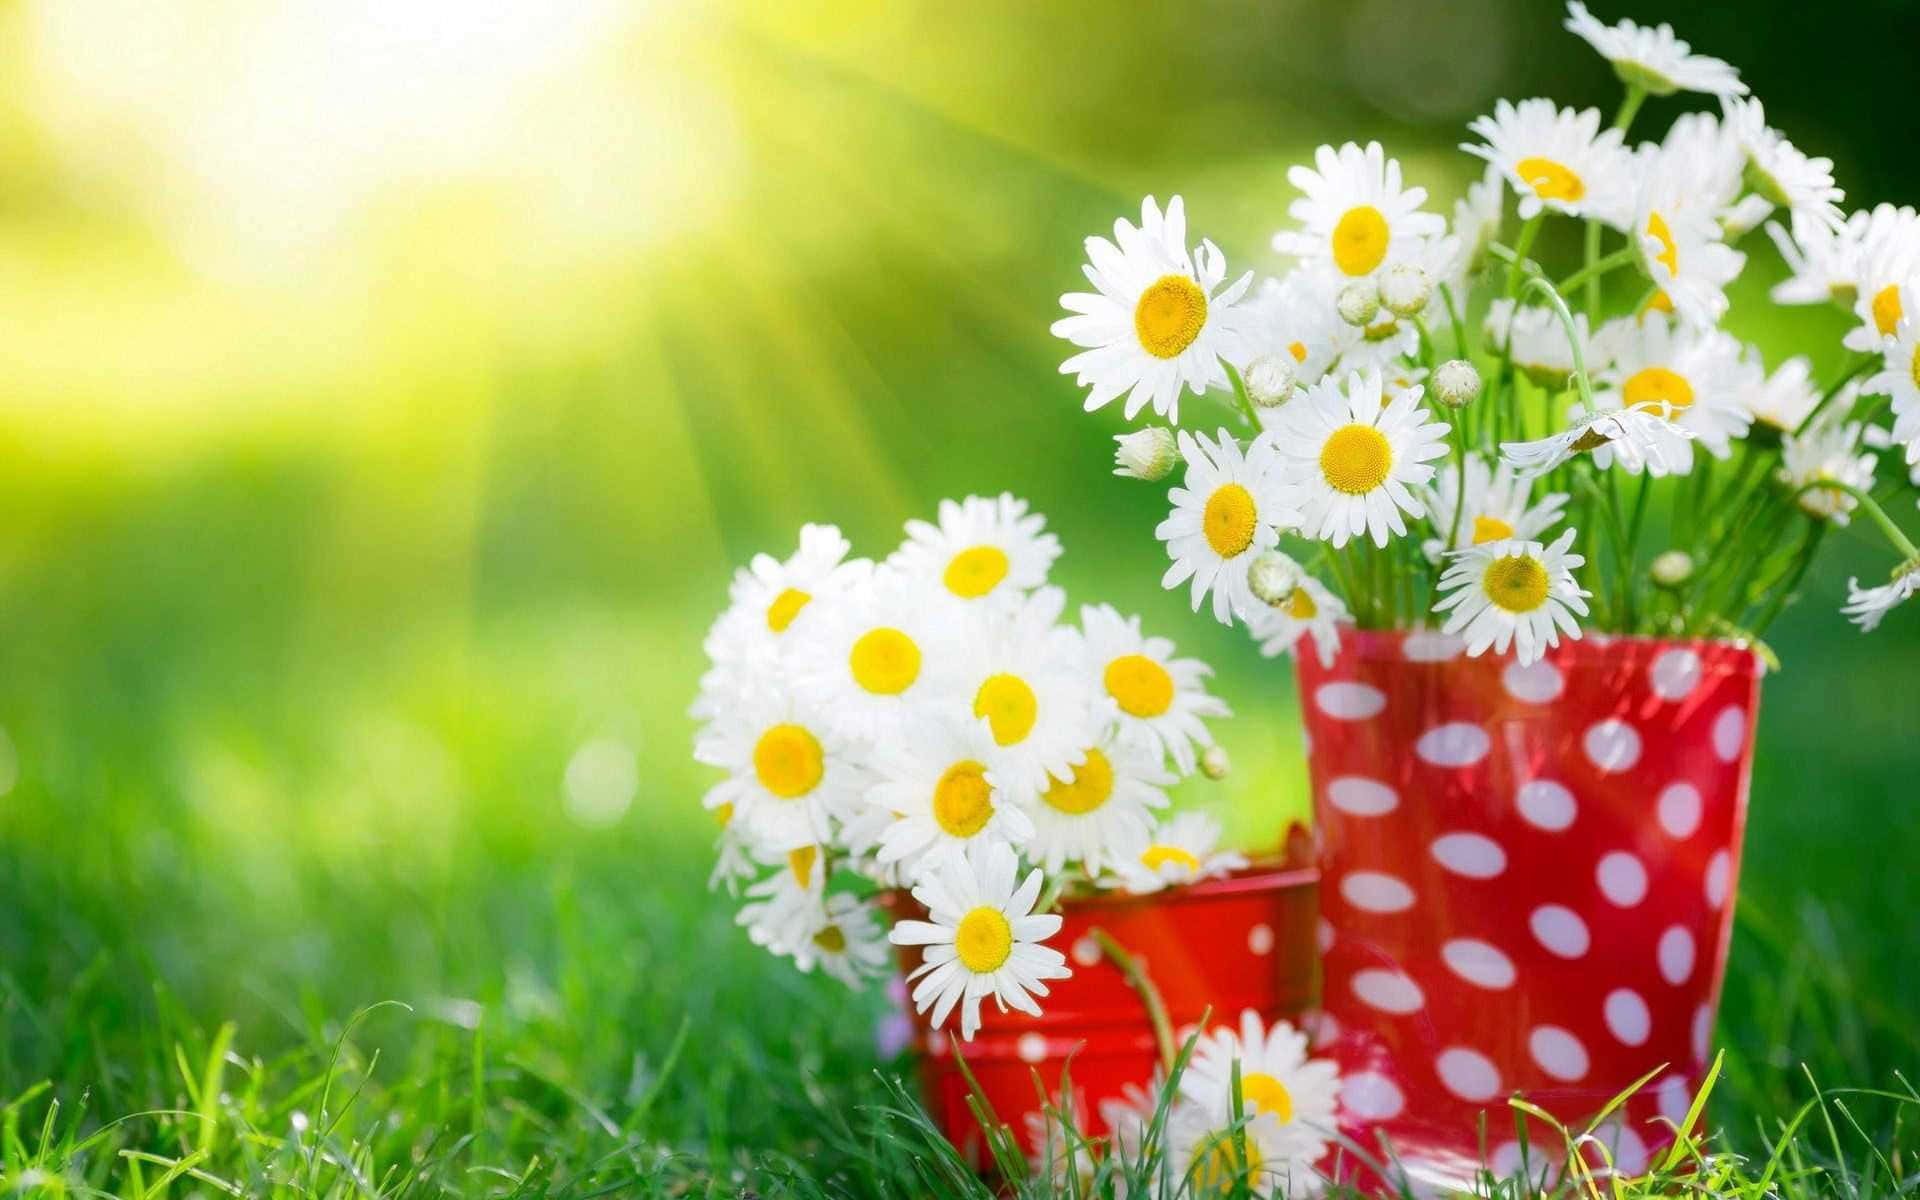 daisies in red polka dot vases on grass